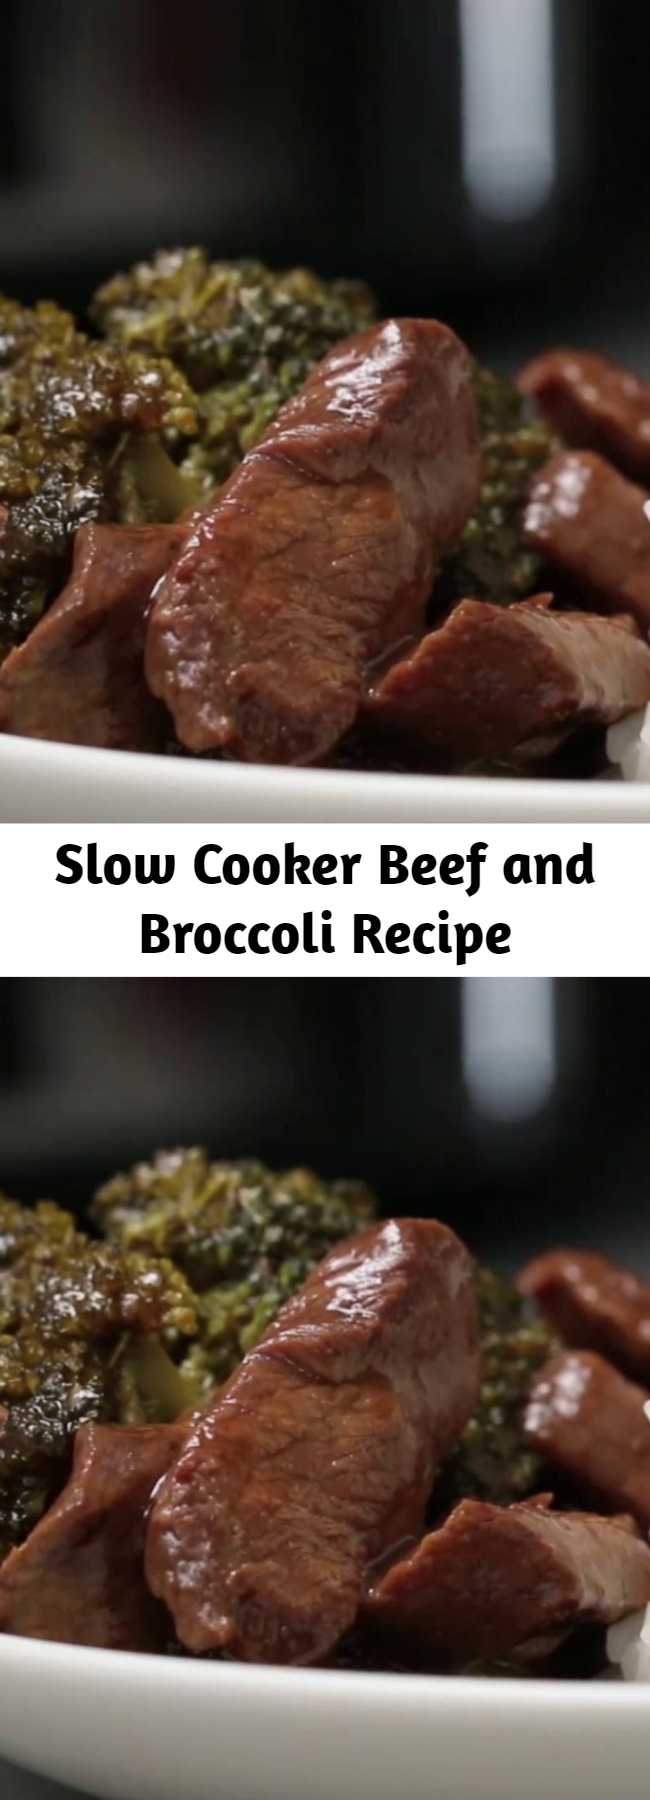 Slow Cooker Beef and Broccoli Recipe - This Beef and Broccoli takes just minutes to throw in the slow cooker. The beef melts in your mouth and the flavor is out of this world!